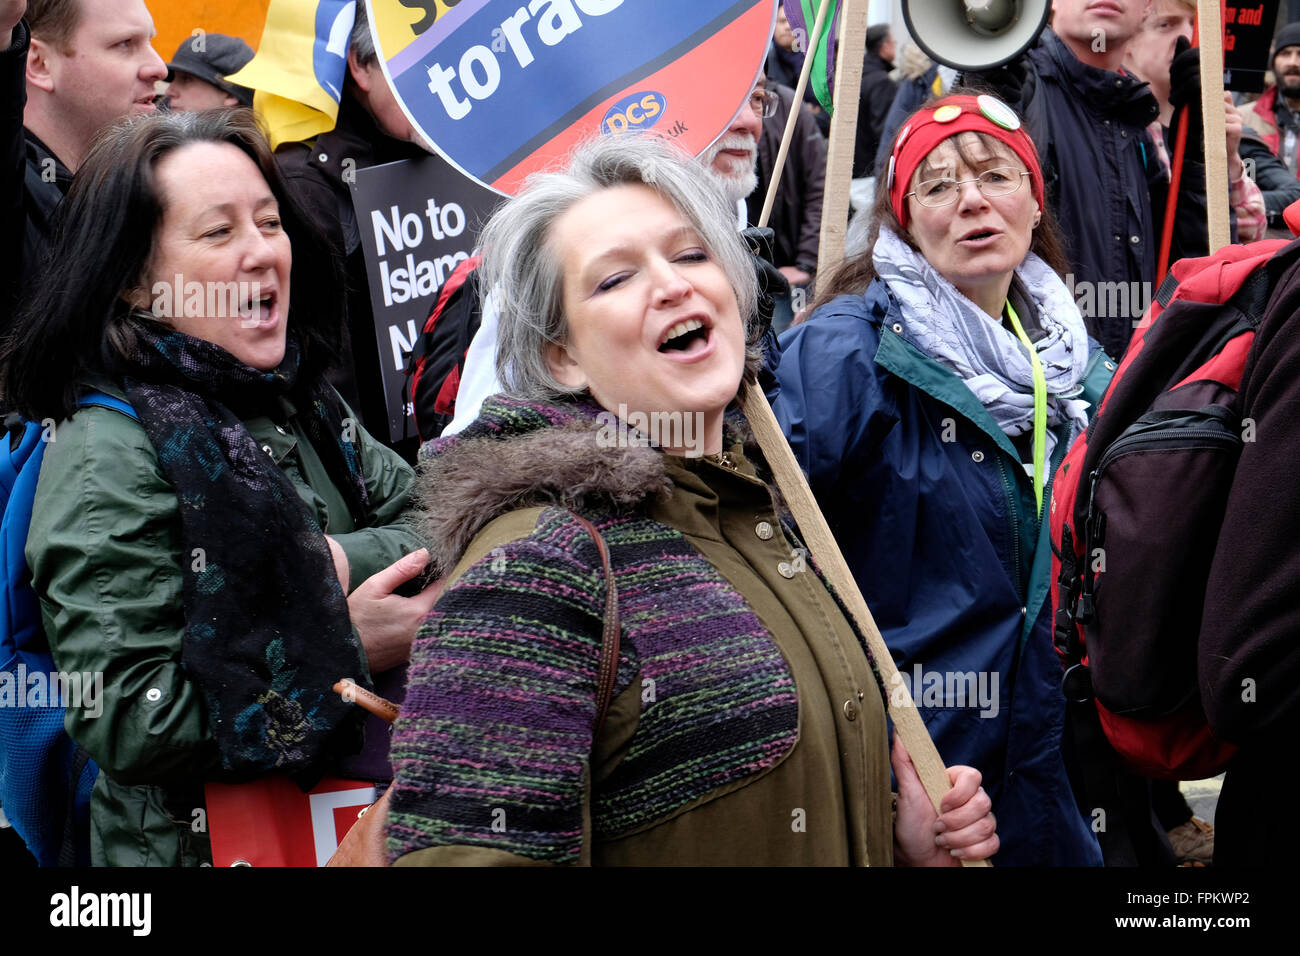 A group of women shouting slogans during a demonstration against racism Stock Photo